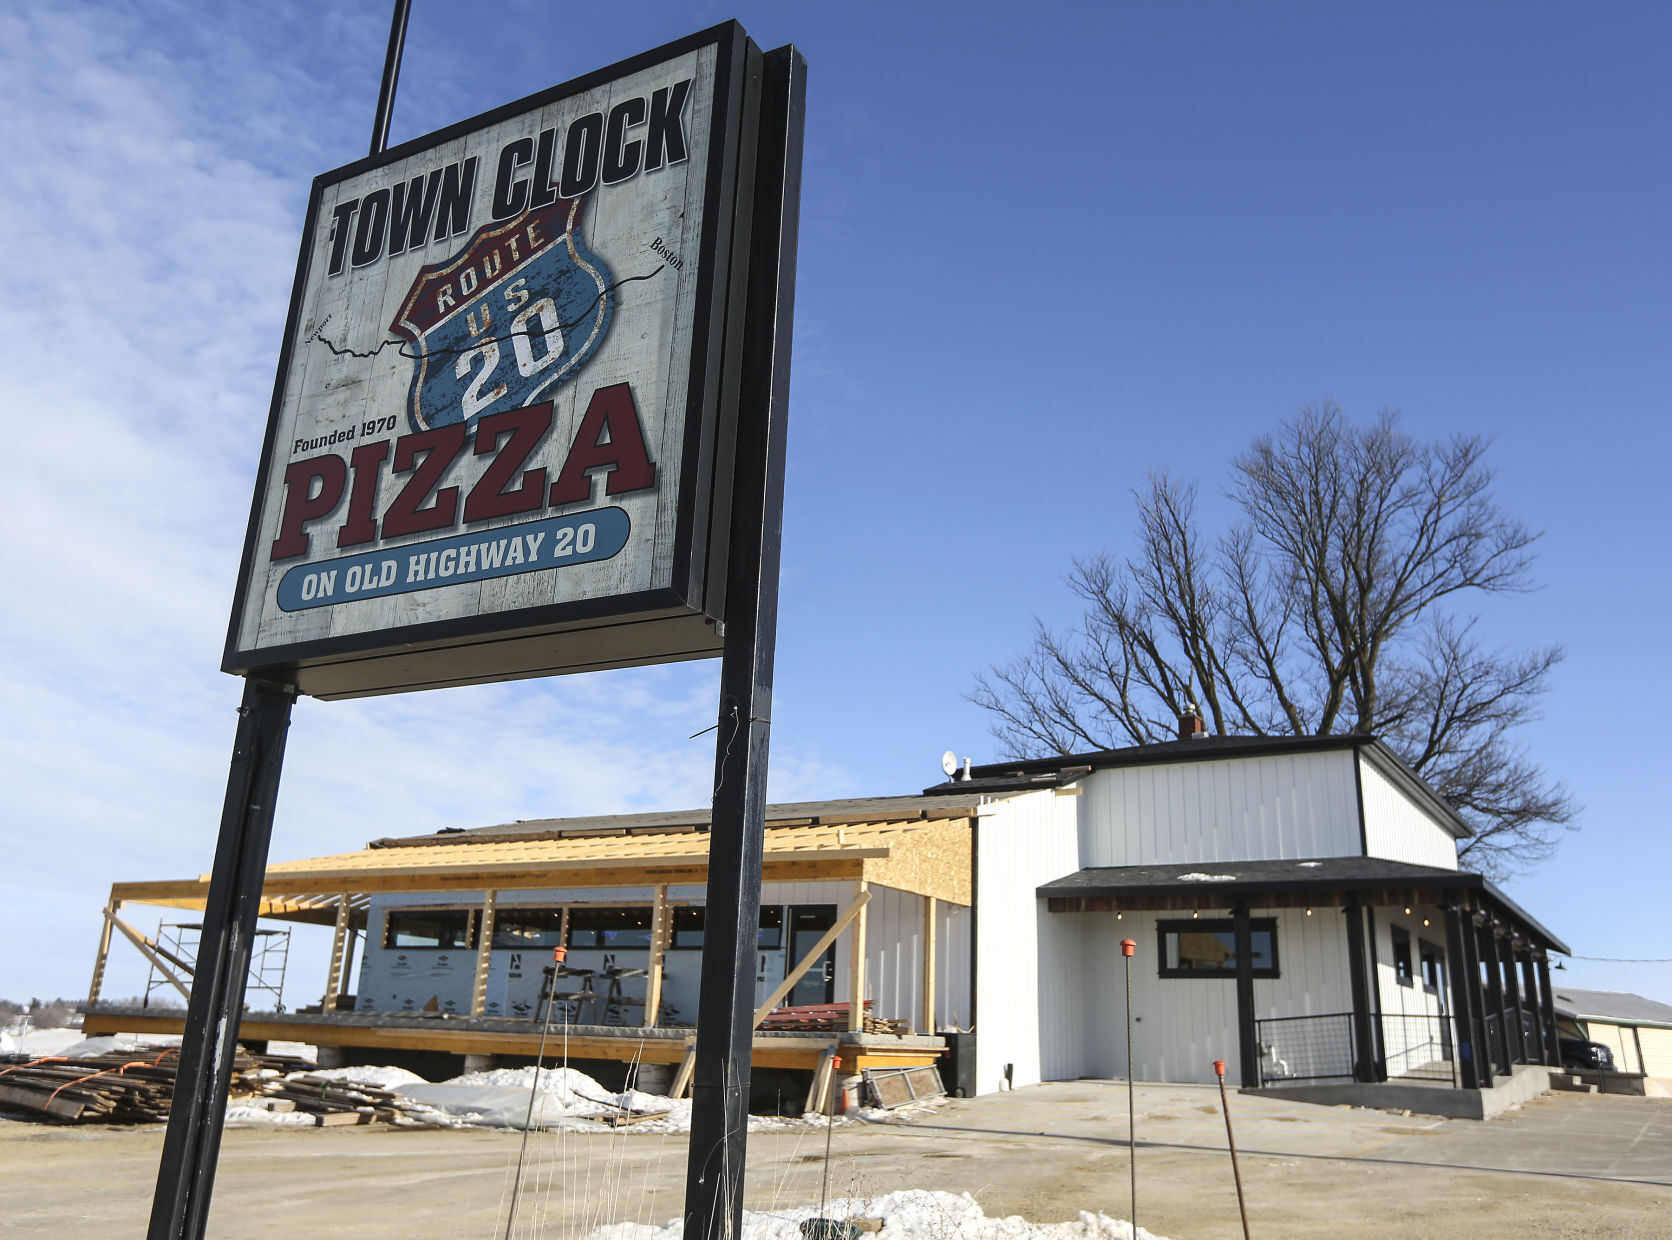 Town Clock Pizza is located at the former site of Junction 21 Restaurant and Bar.    PHOTO CREDIT: Dave Kettering